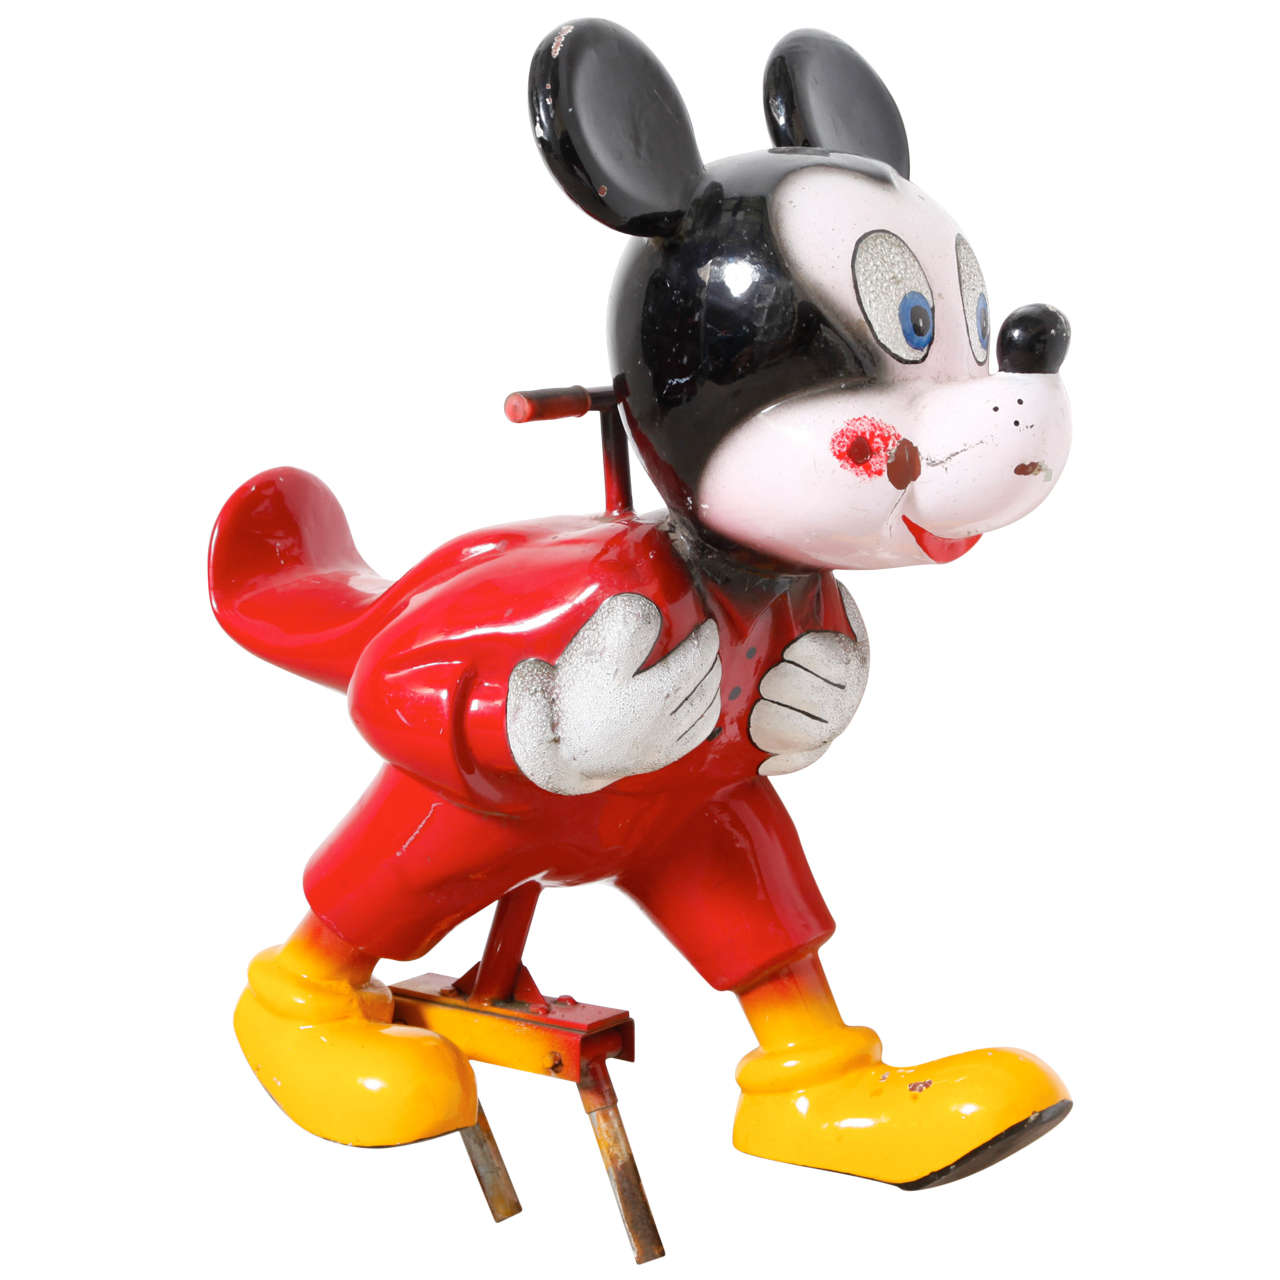 Exceptional Mickey Mouse Carousel Figure